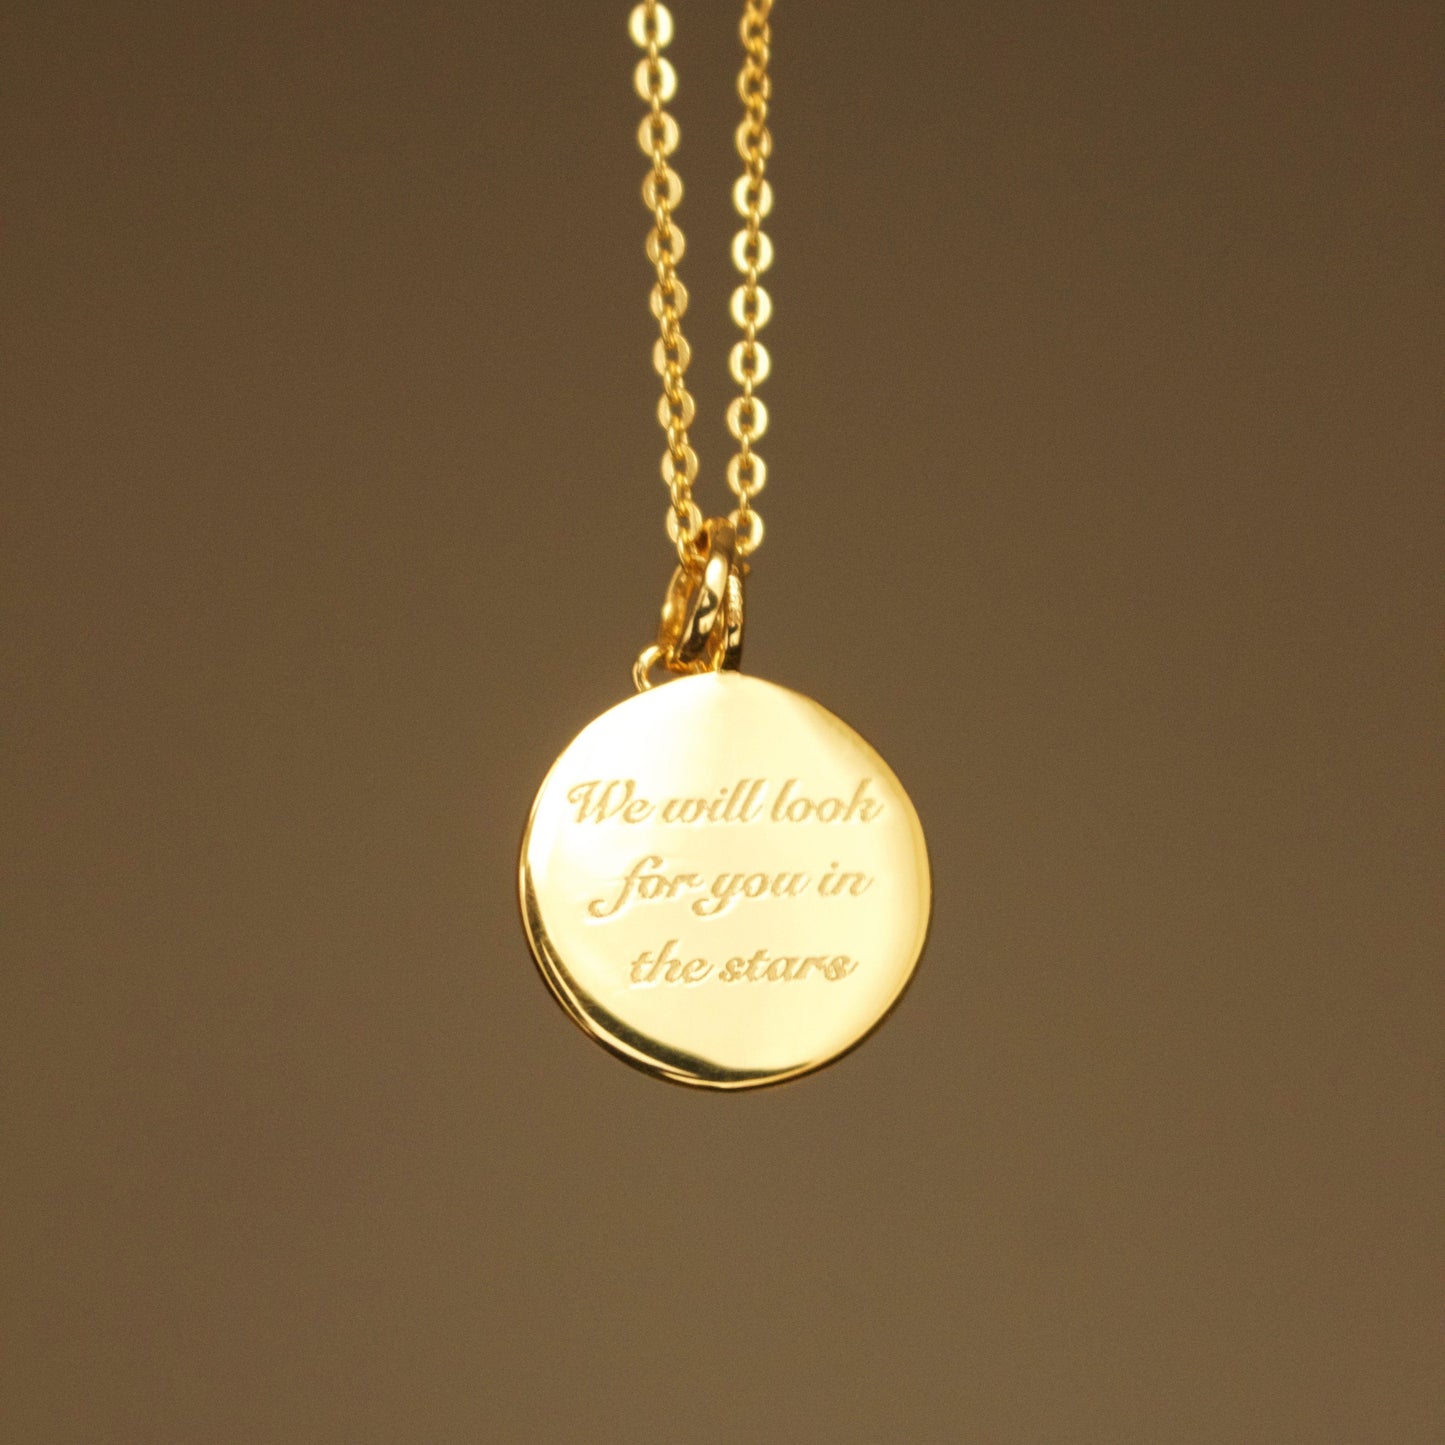 14k Gold Plated "We will look for you in the stars" Coin Necklace with Crescent Moon Charm Necklace Pink City 